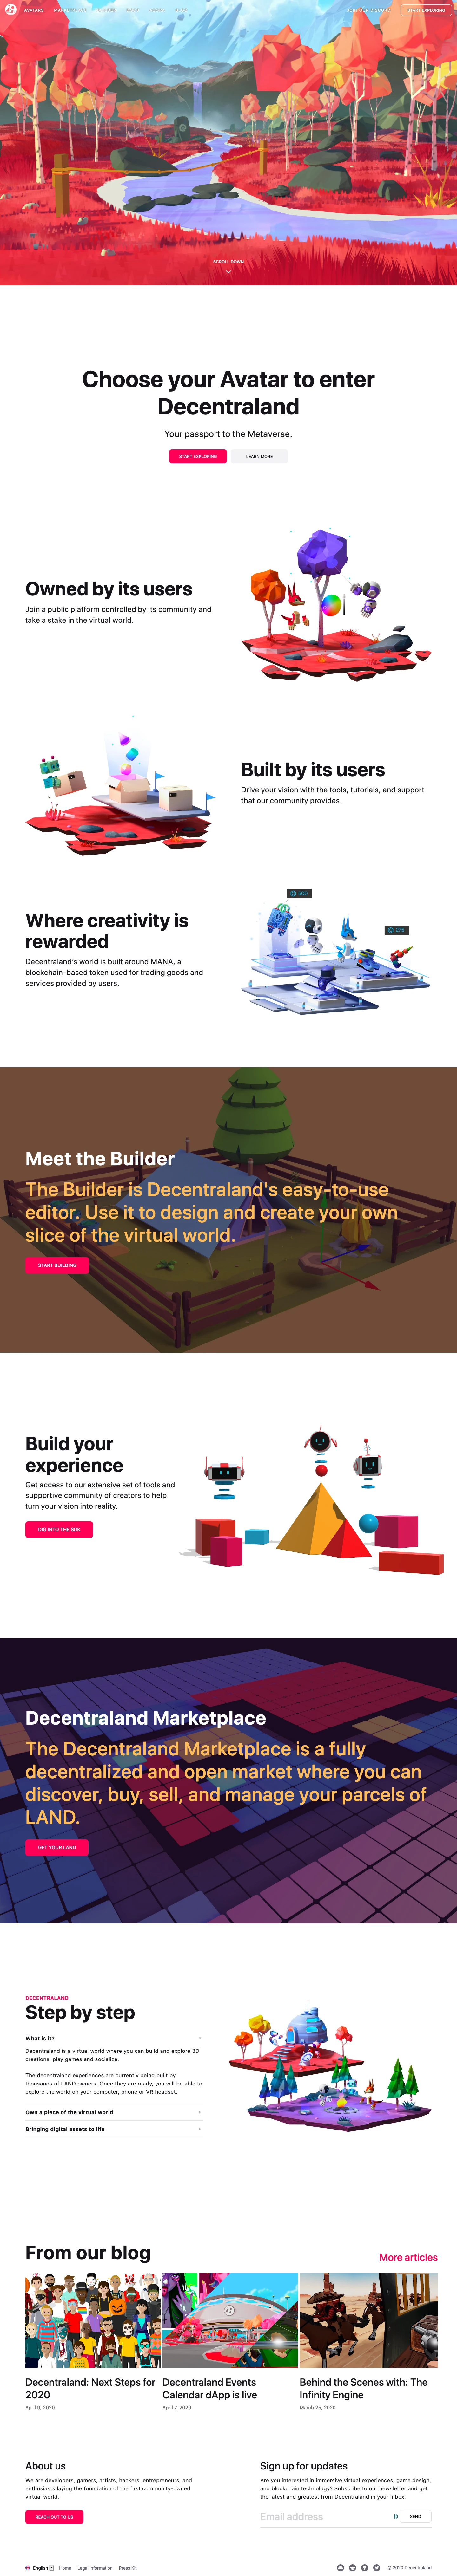 Decentraland Landing Page Example: Decentraland is a virtual world where you can build and explore 3D creations, play games and socialize.